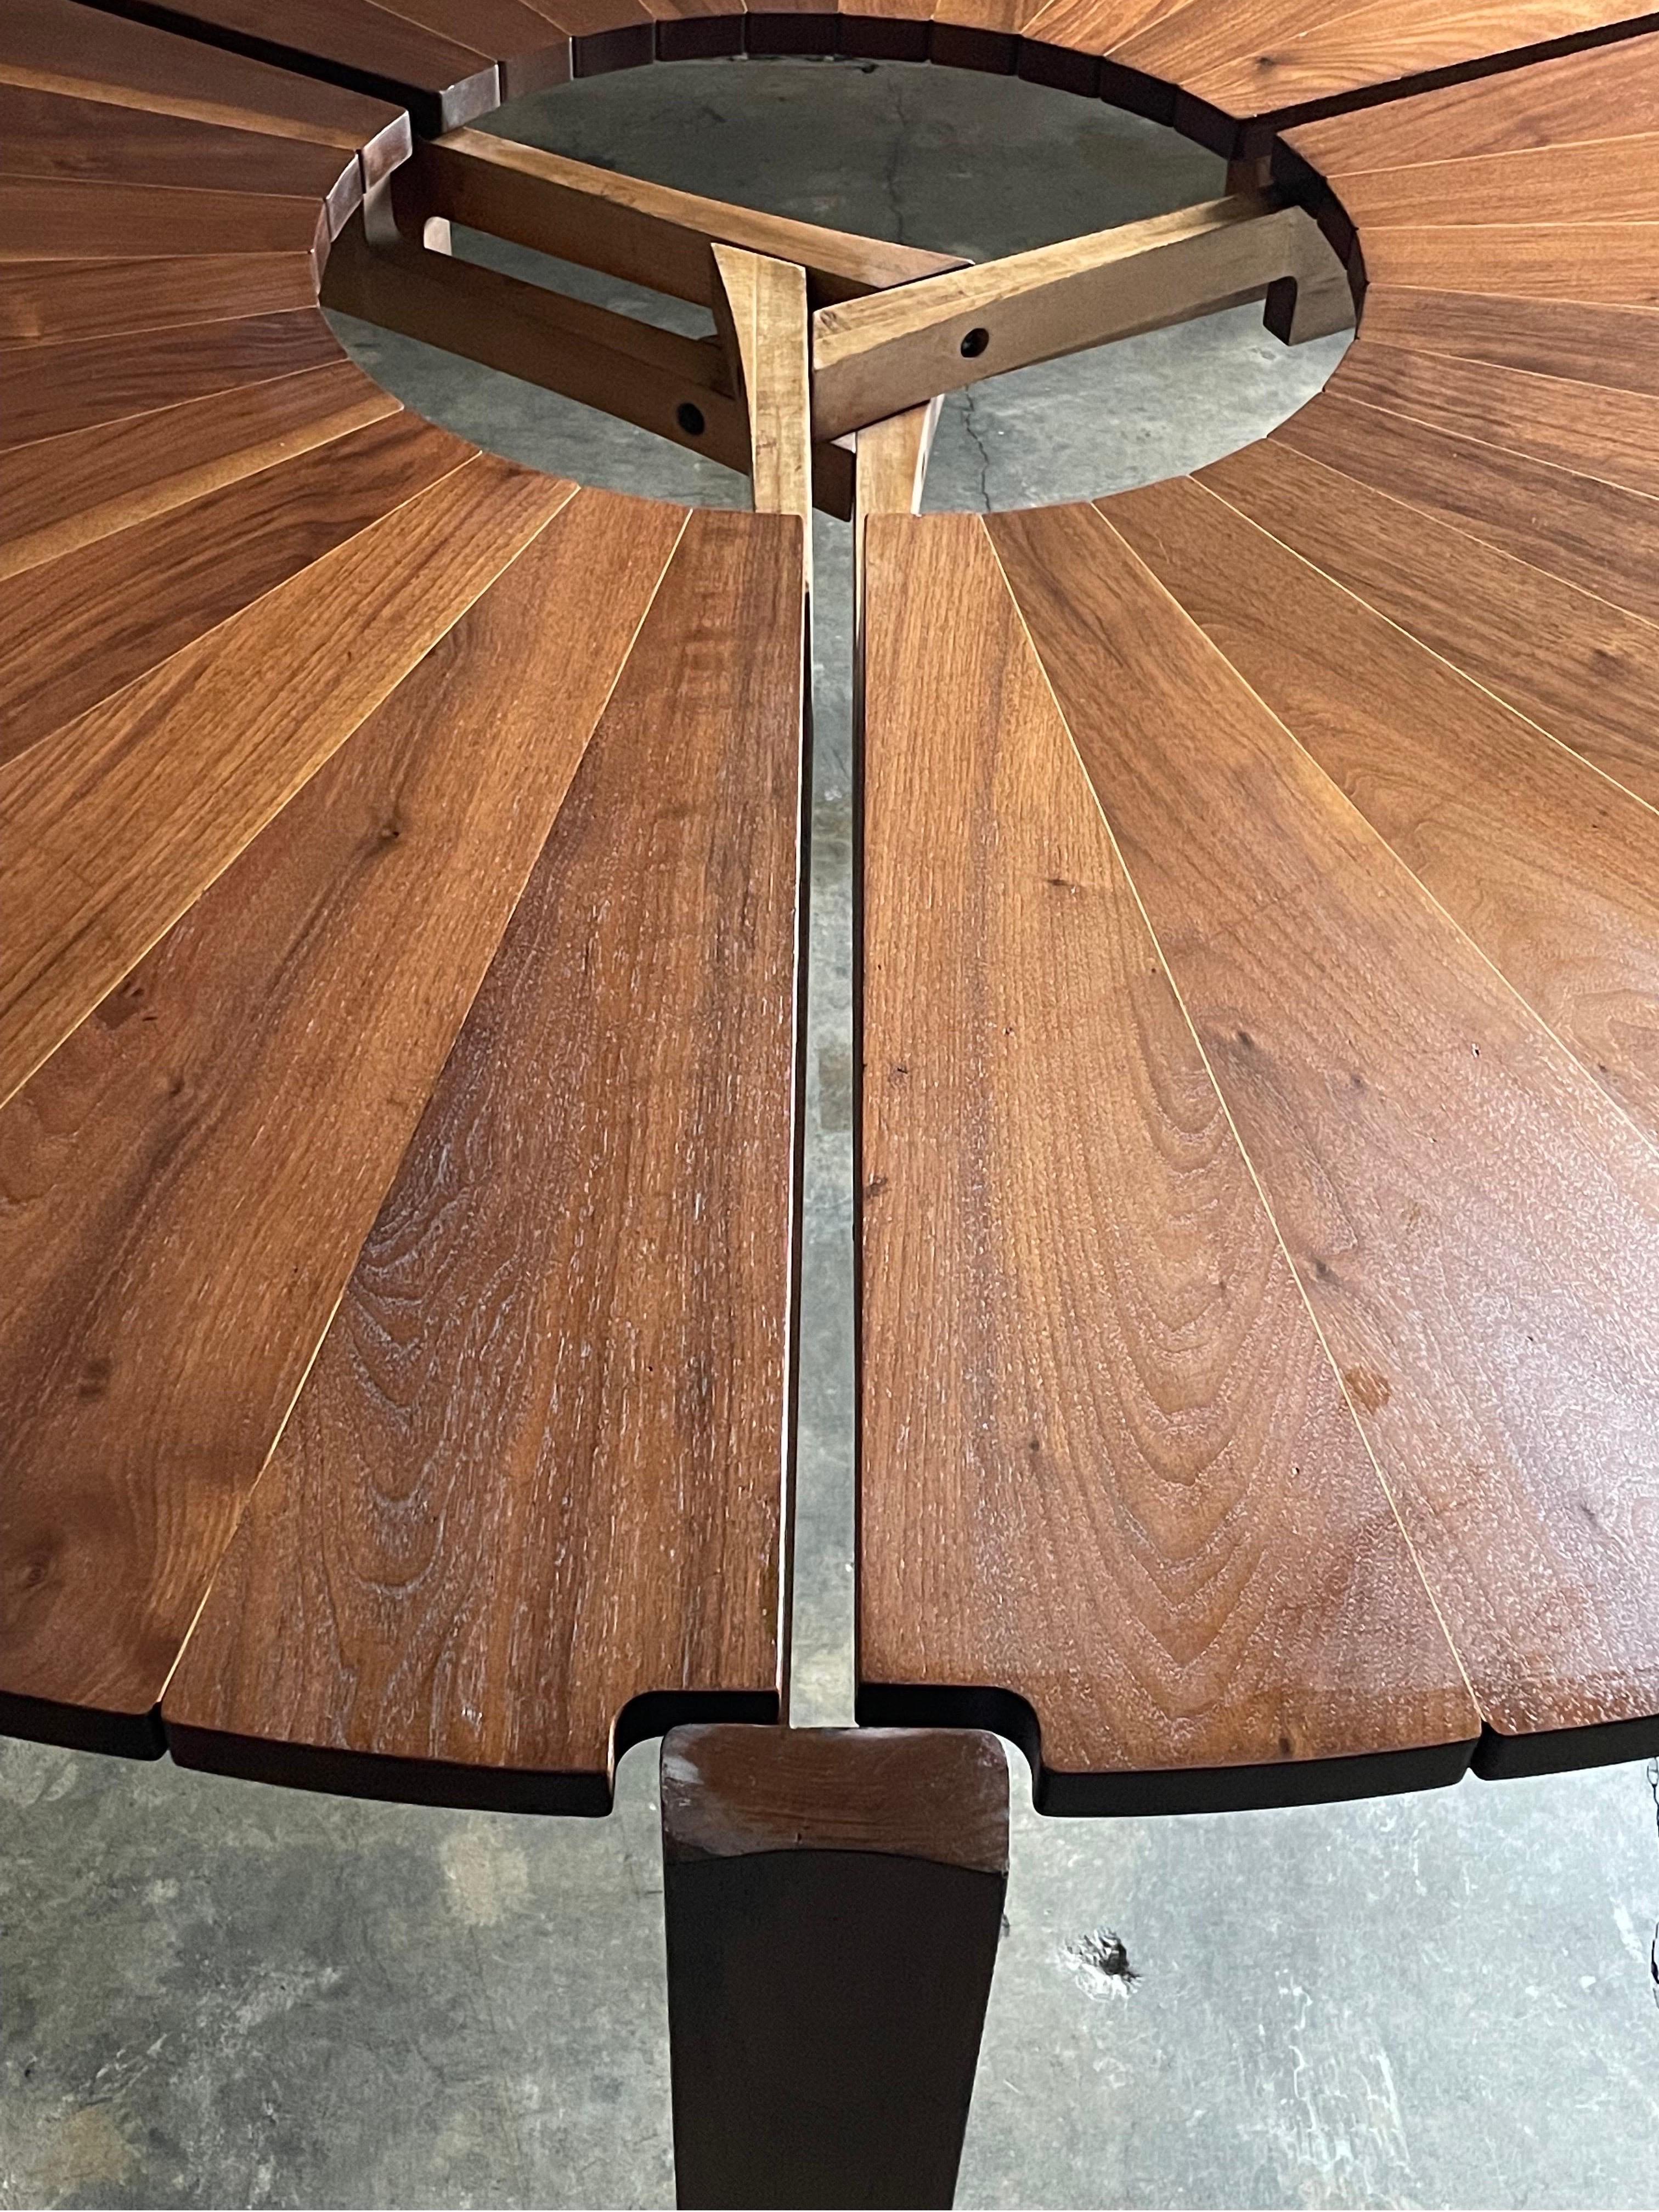 Late 20th Century Studiocraft Round Petal Dining Table in Walnut and Maple, Charles Faucher 1975 For Sale